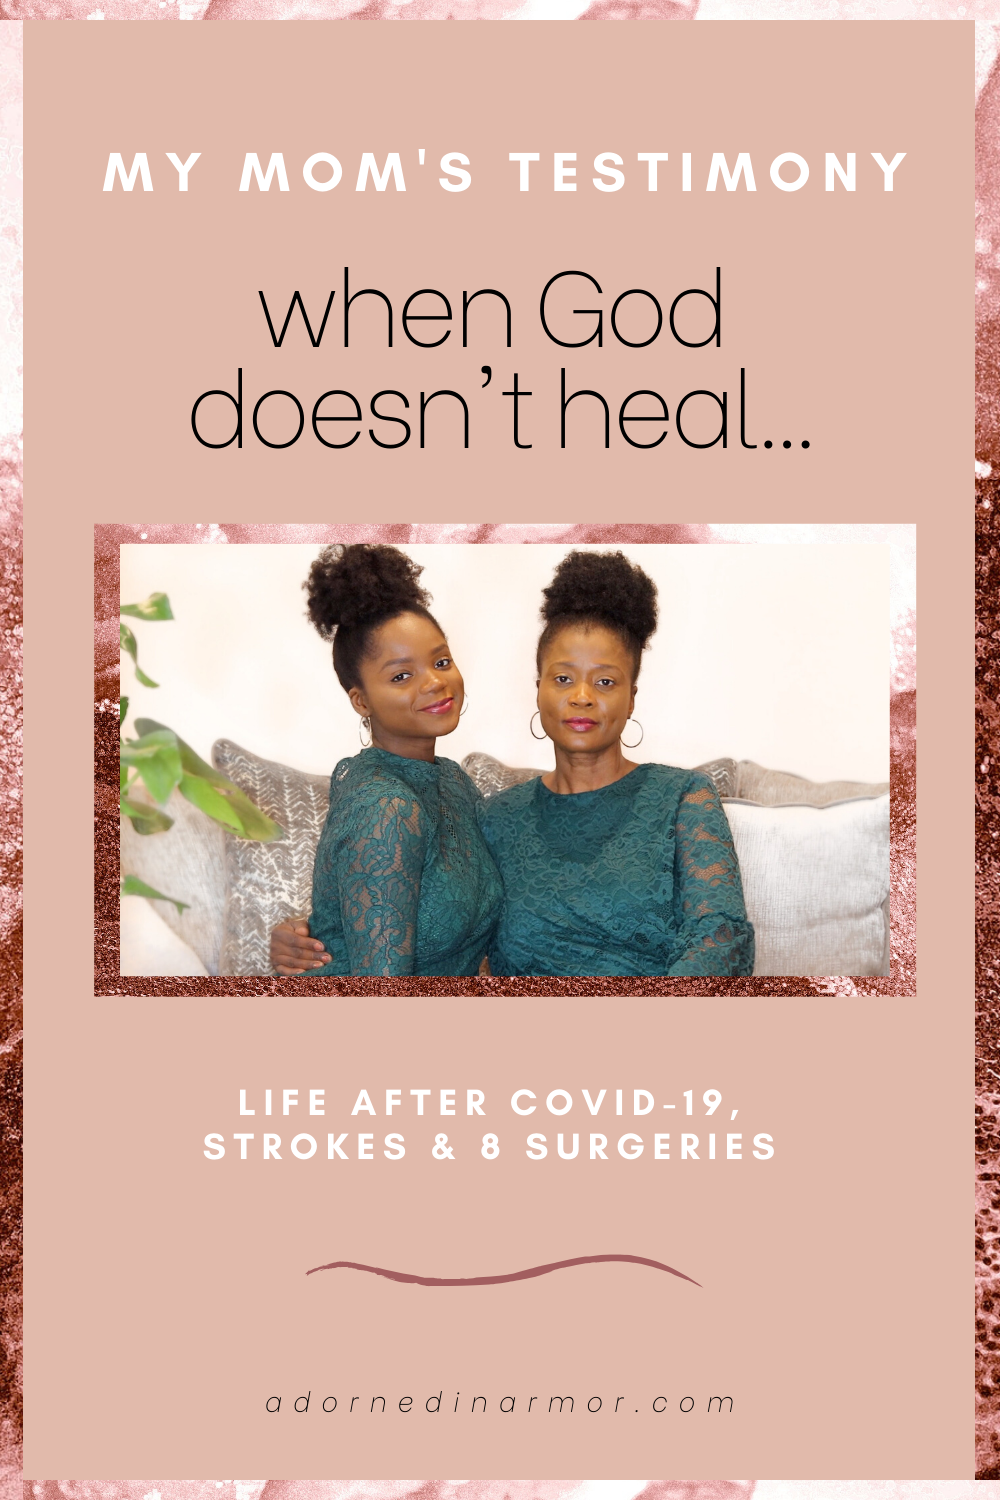 Mother and daughter pose for photo to share Christian testimony of overcoming covid-19 and other illnesses.